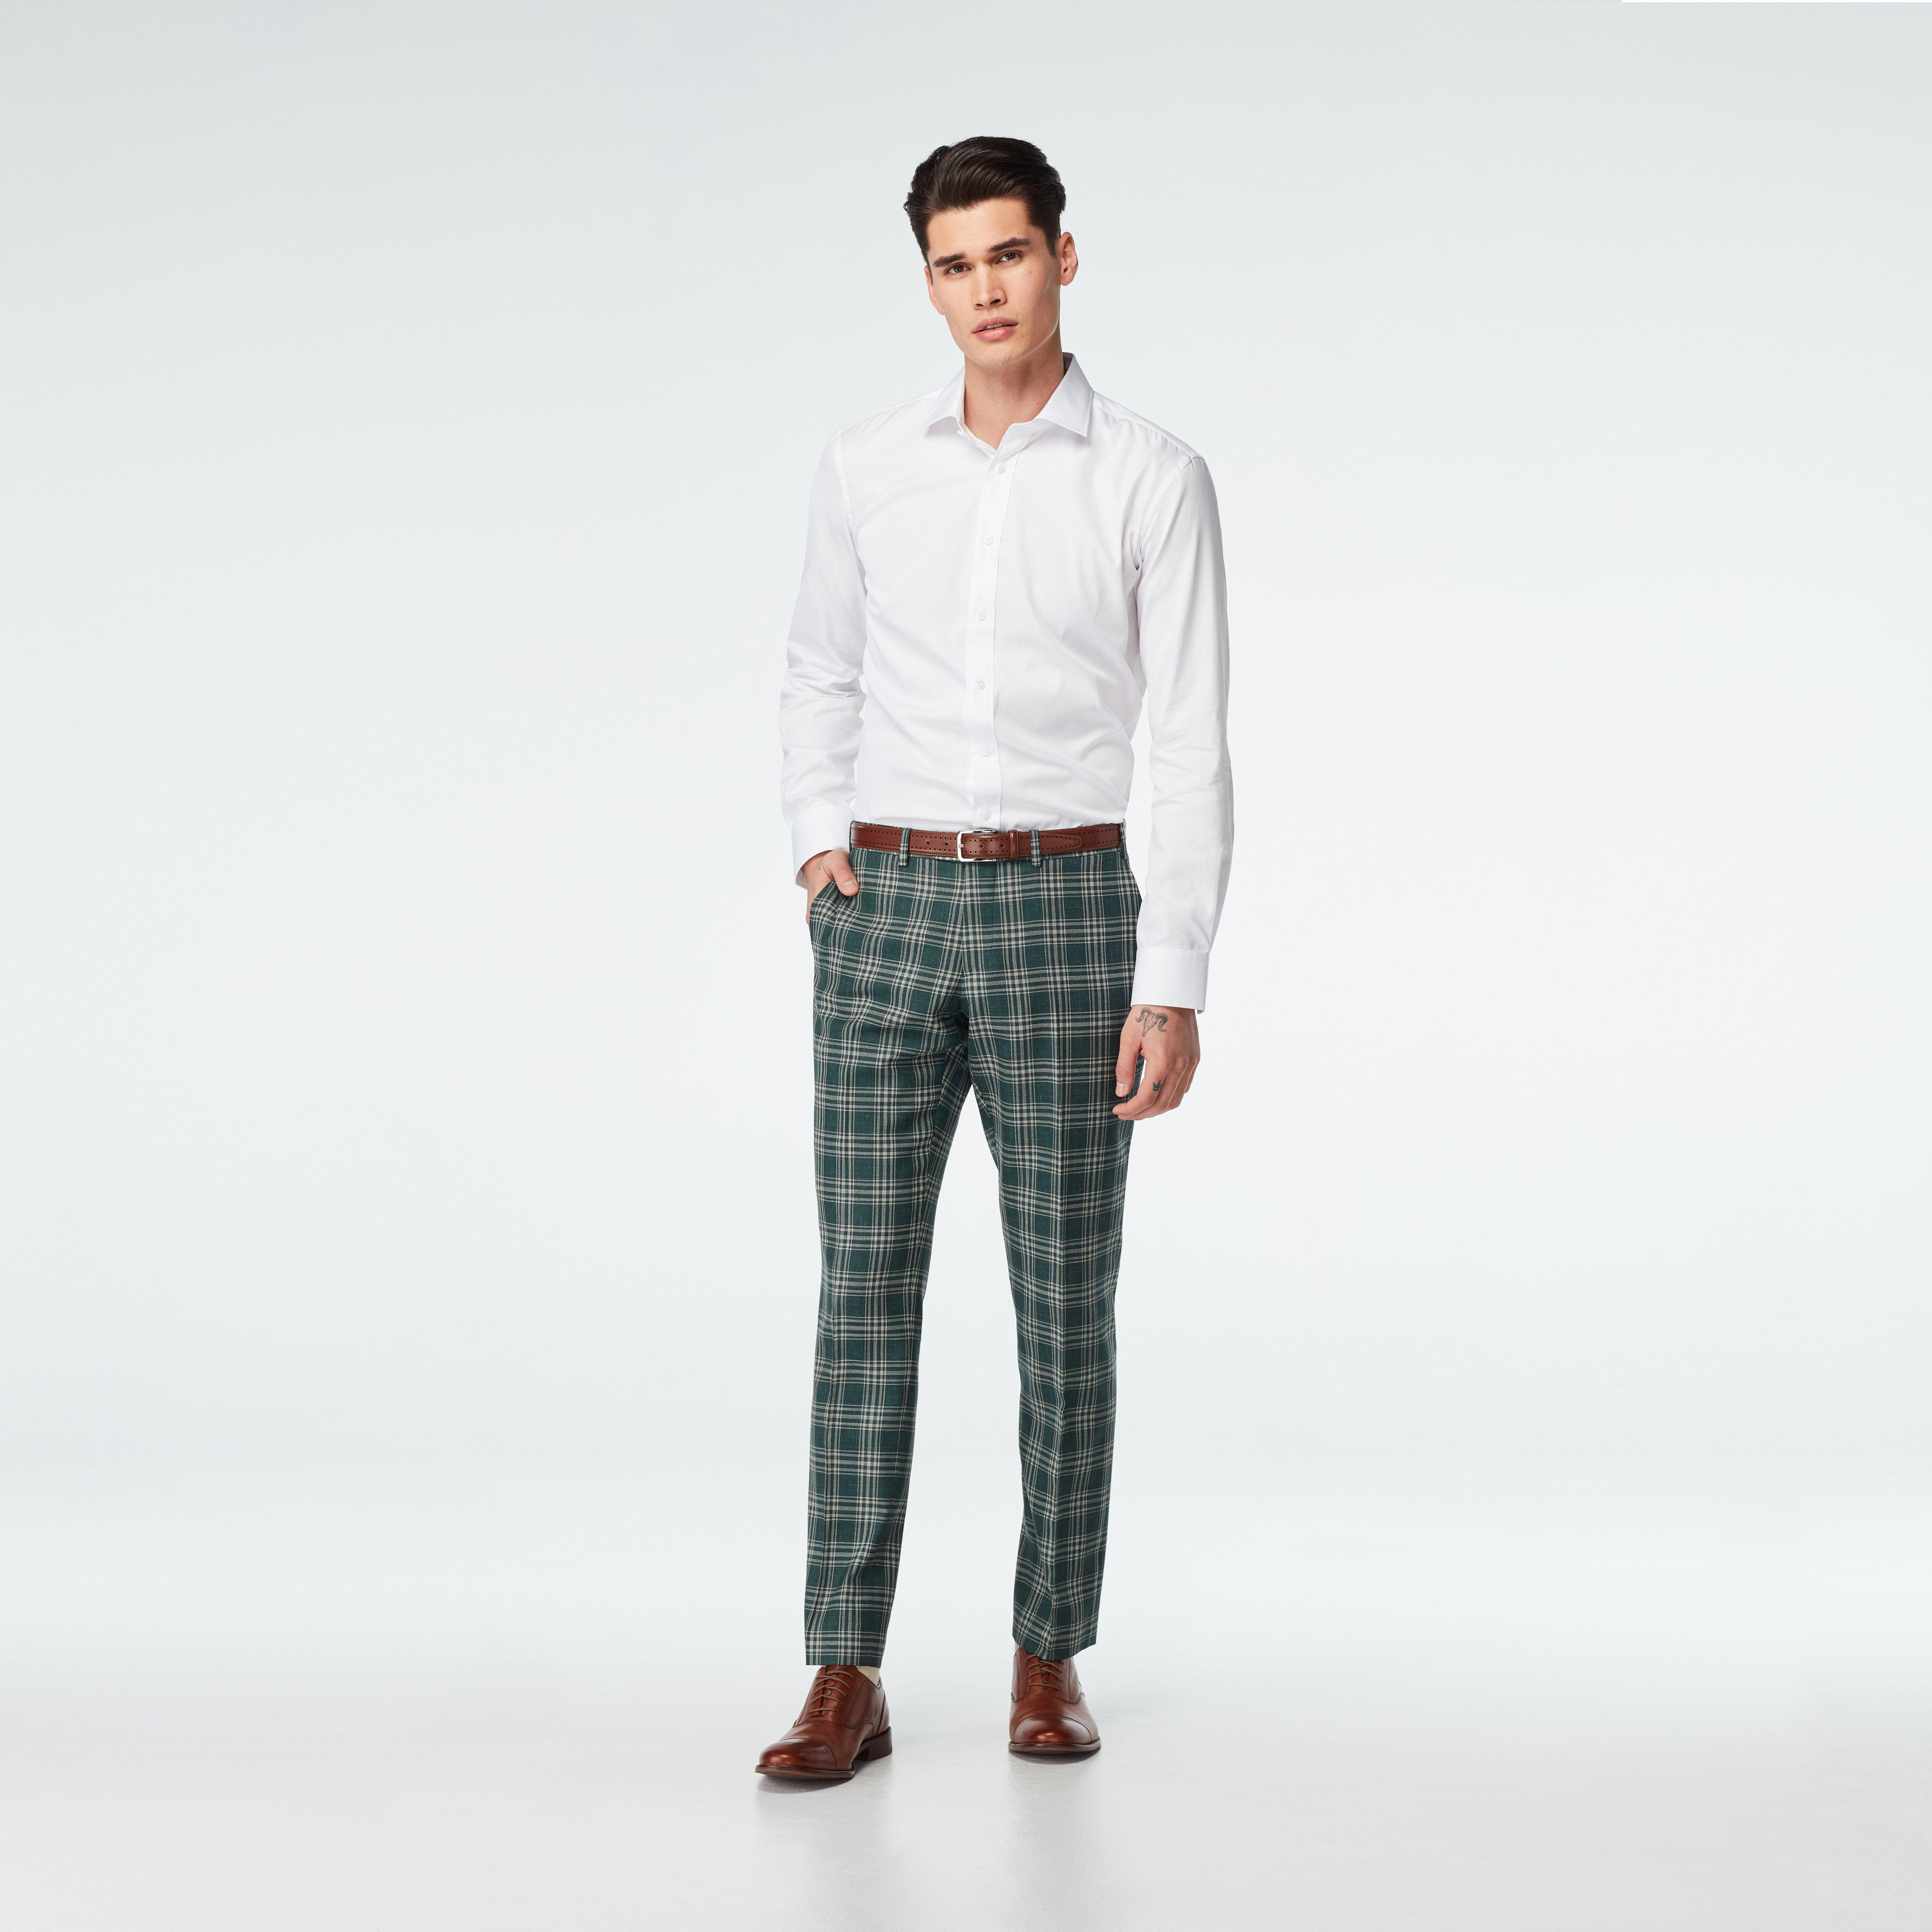 French Connection wedding suit pants in gray plaid | ASOS